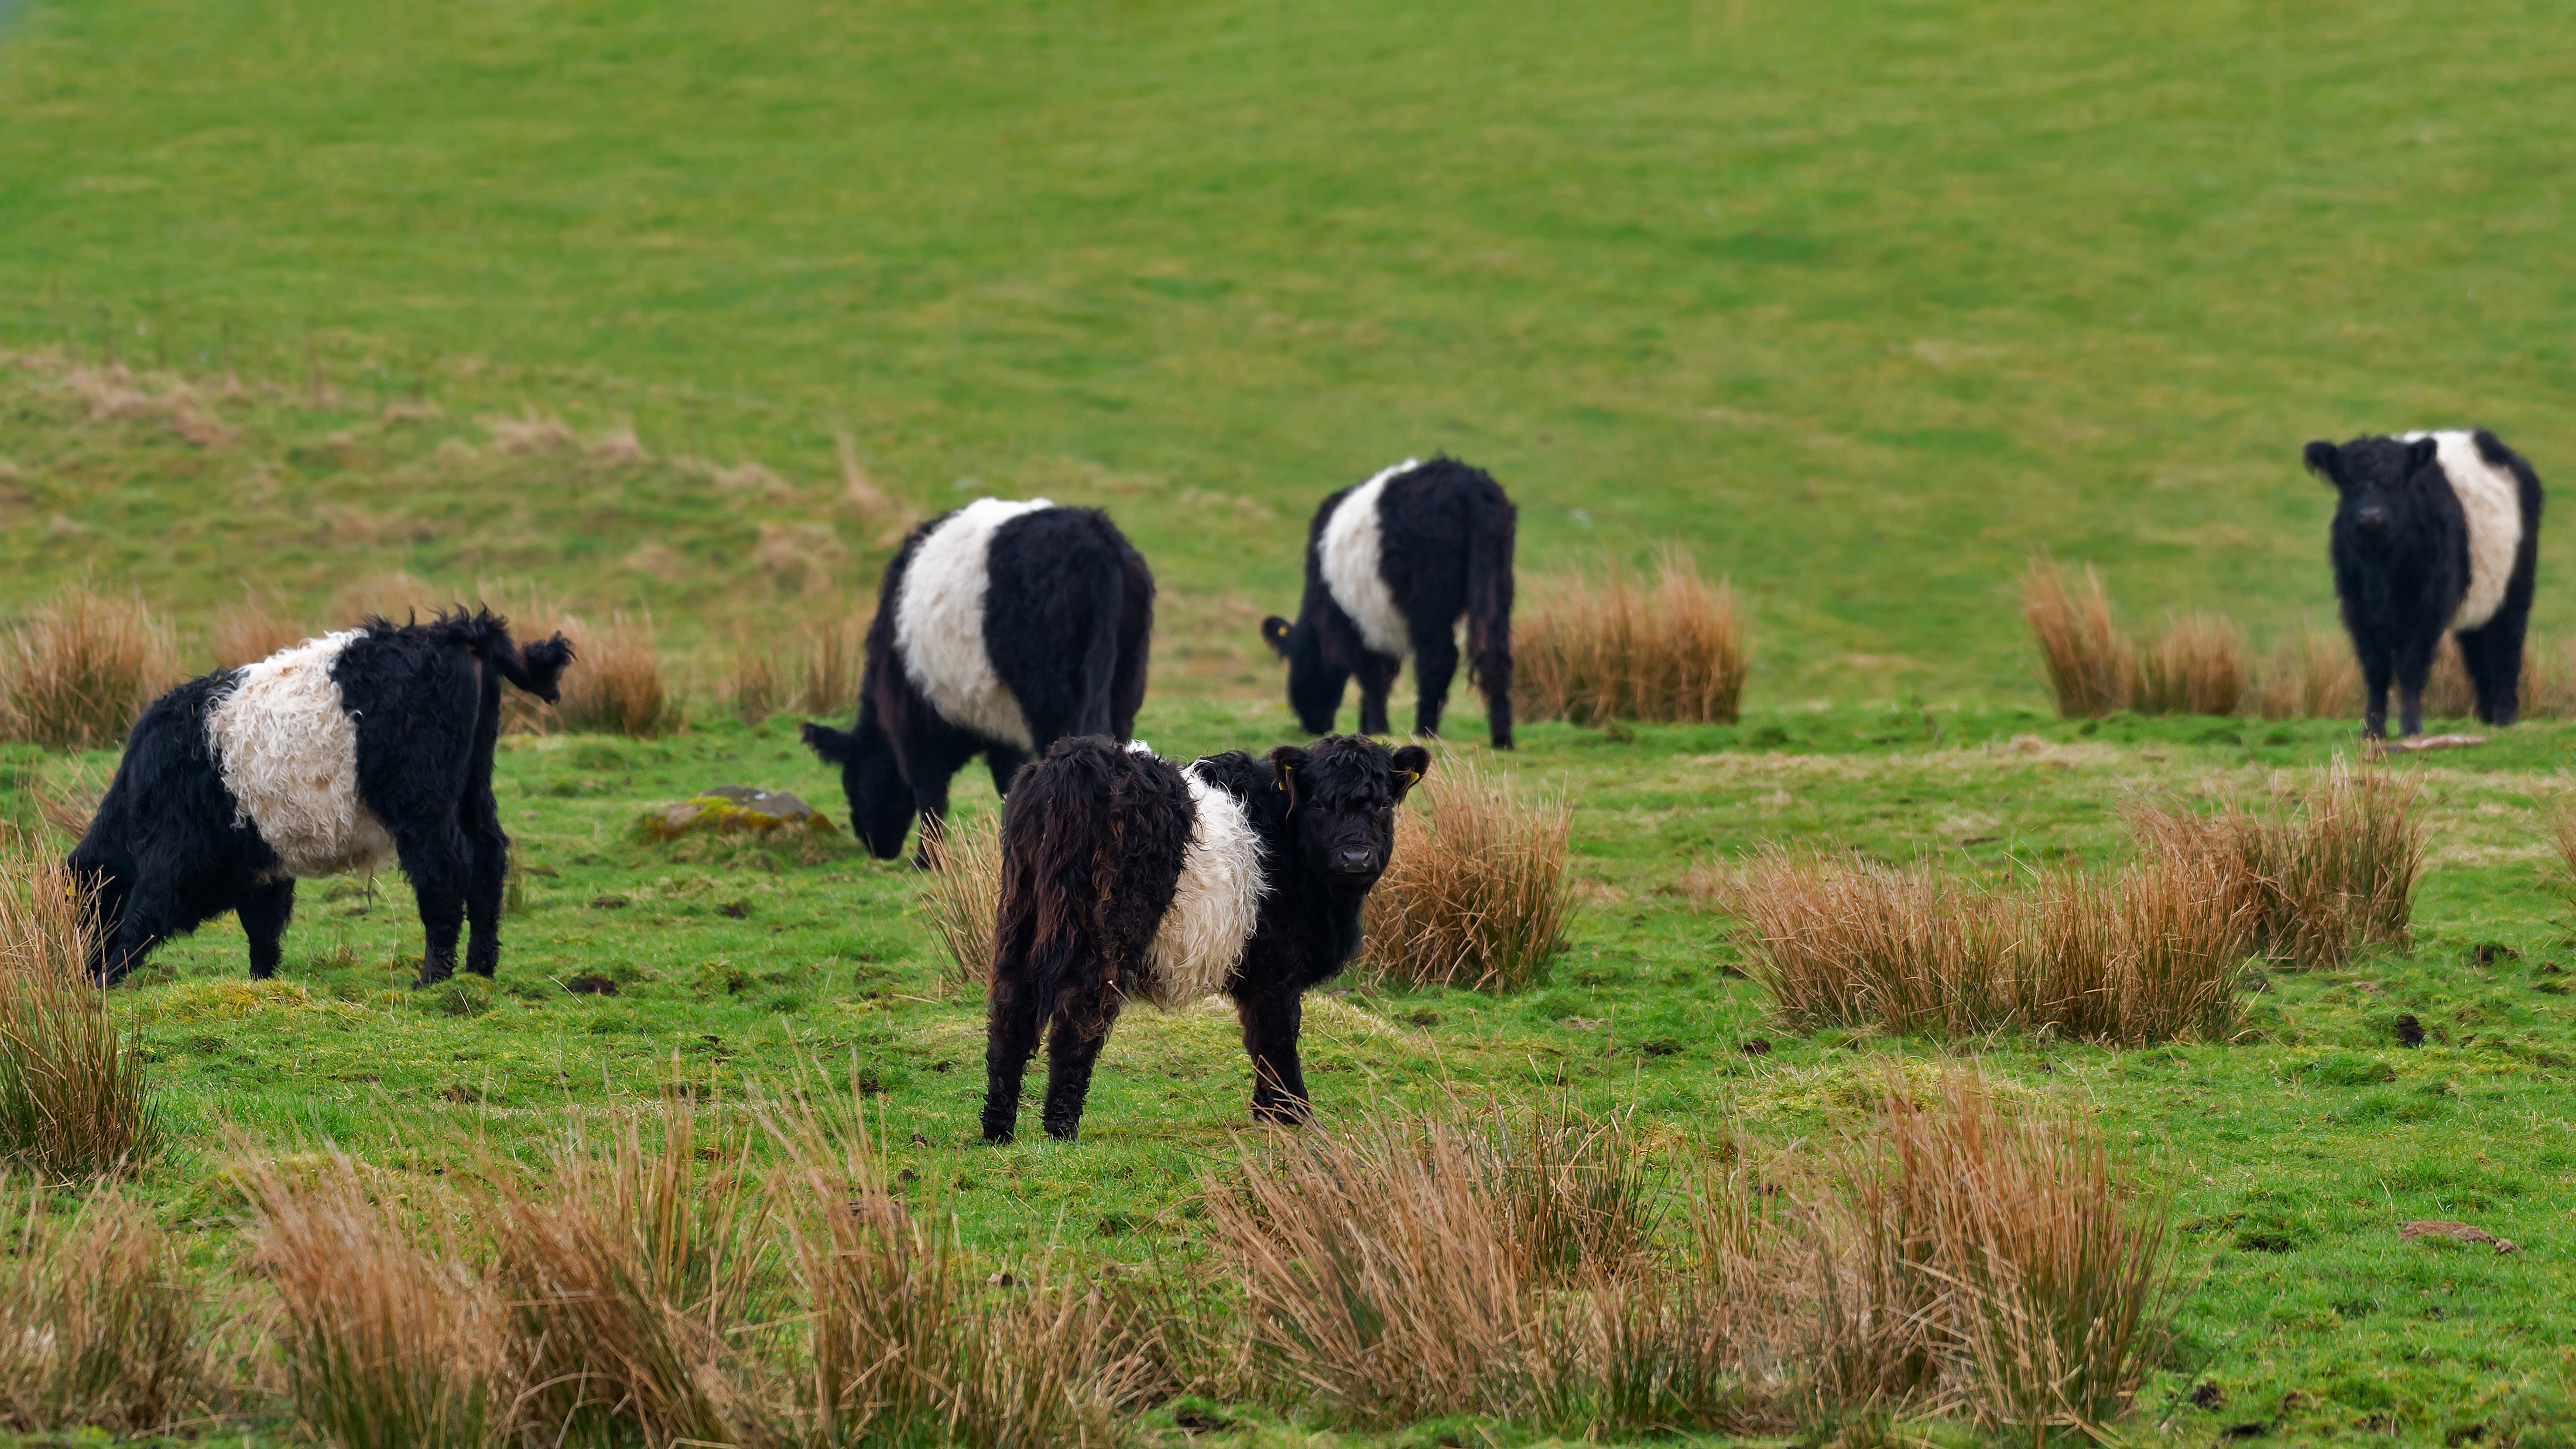 Belted Galloway cows in Scotland (© JohnFScott/Getty Images)